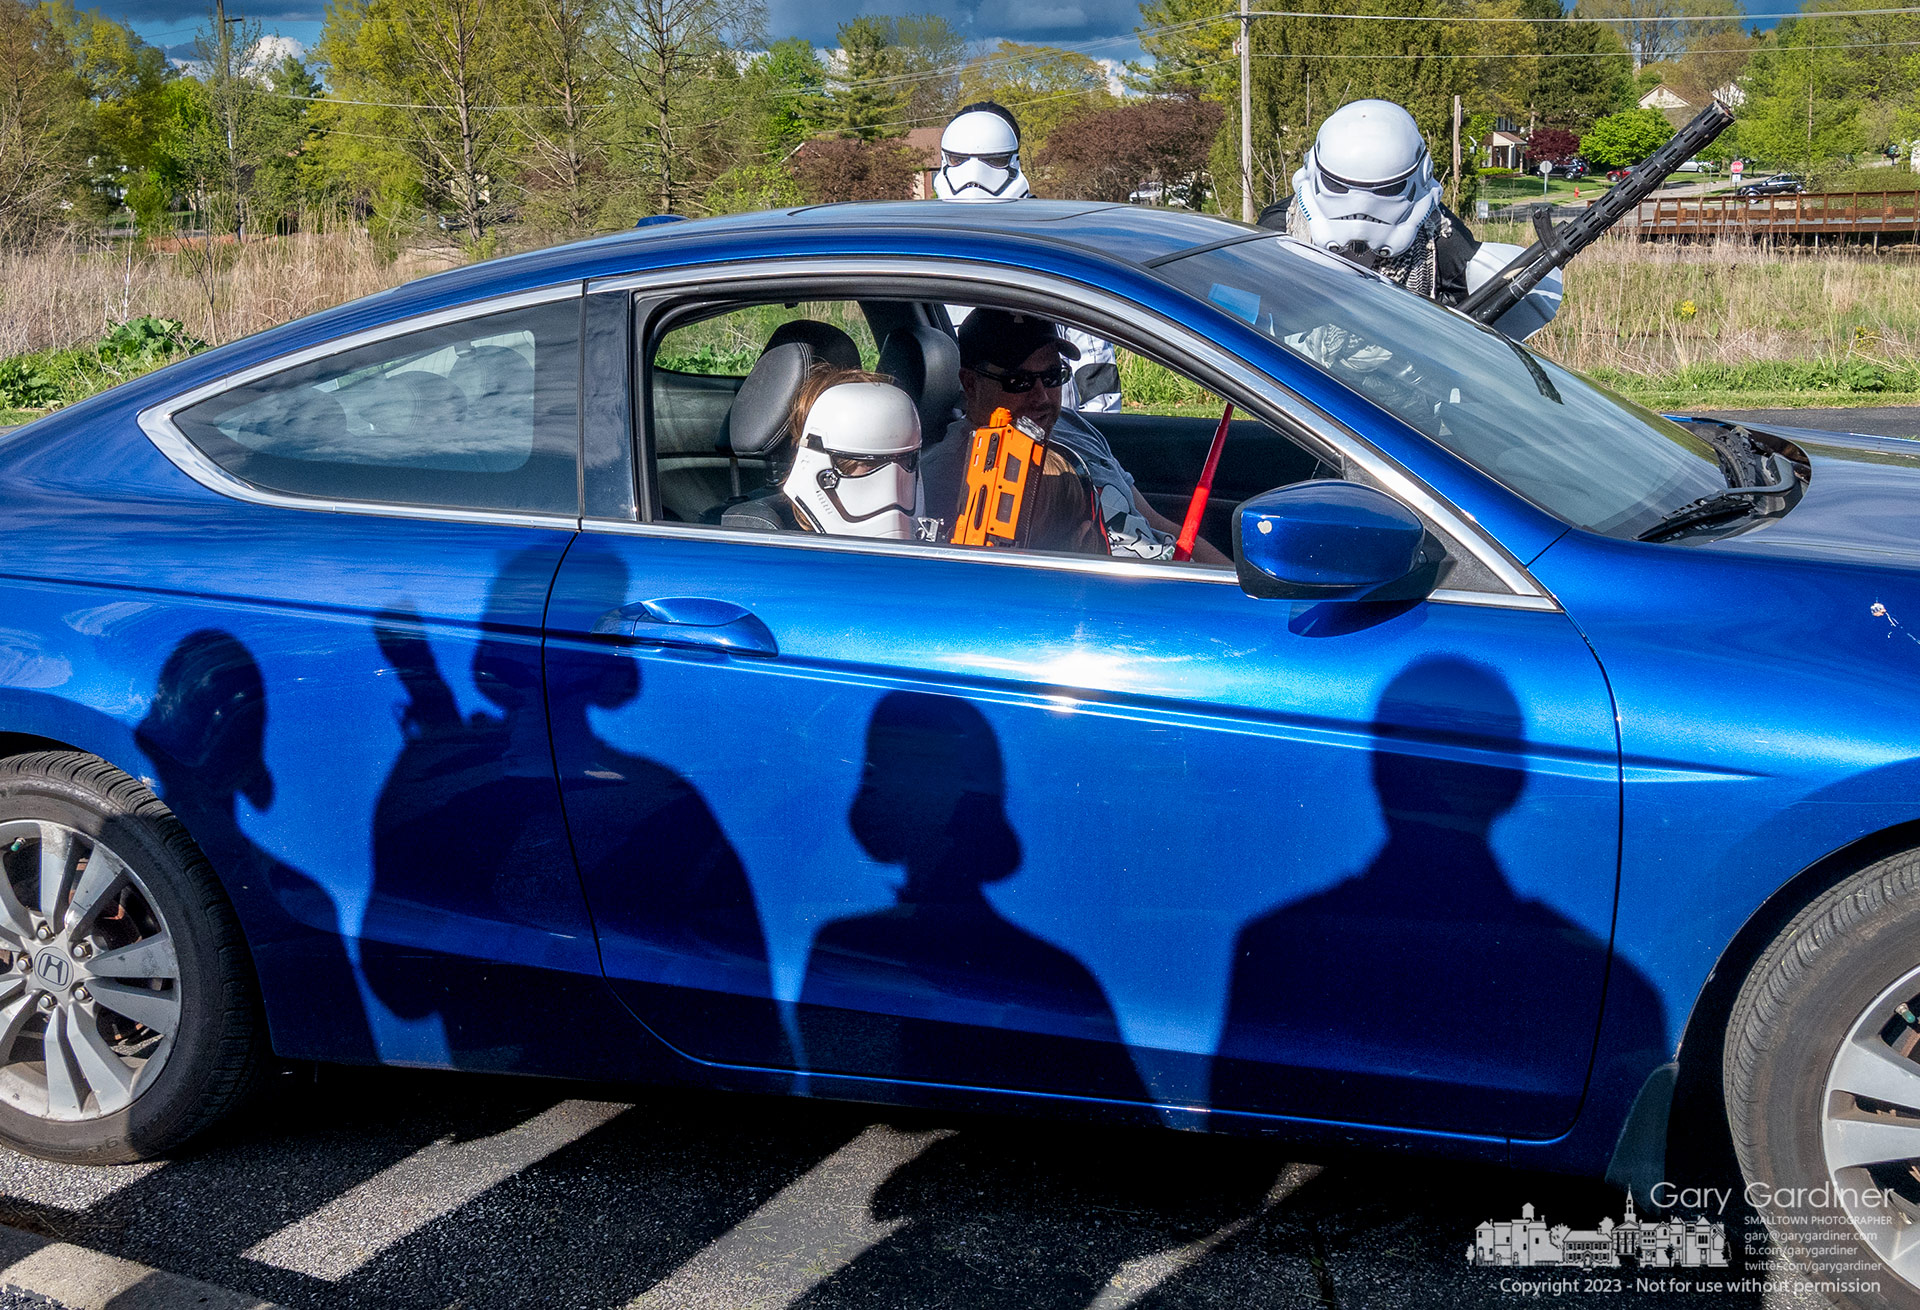 Shadows from a phalanx of Imperial Guard fall on a vehicle being investigated by Stormtroopers at Highlands Pool before dropping off food items for W.A.R.M. on Star Wars Day, May 4. My Final Photo for May 4, 2023.